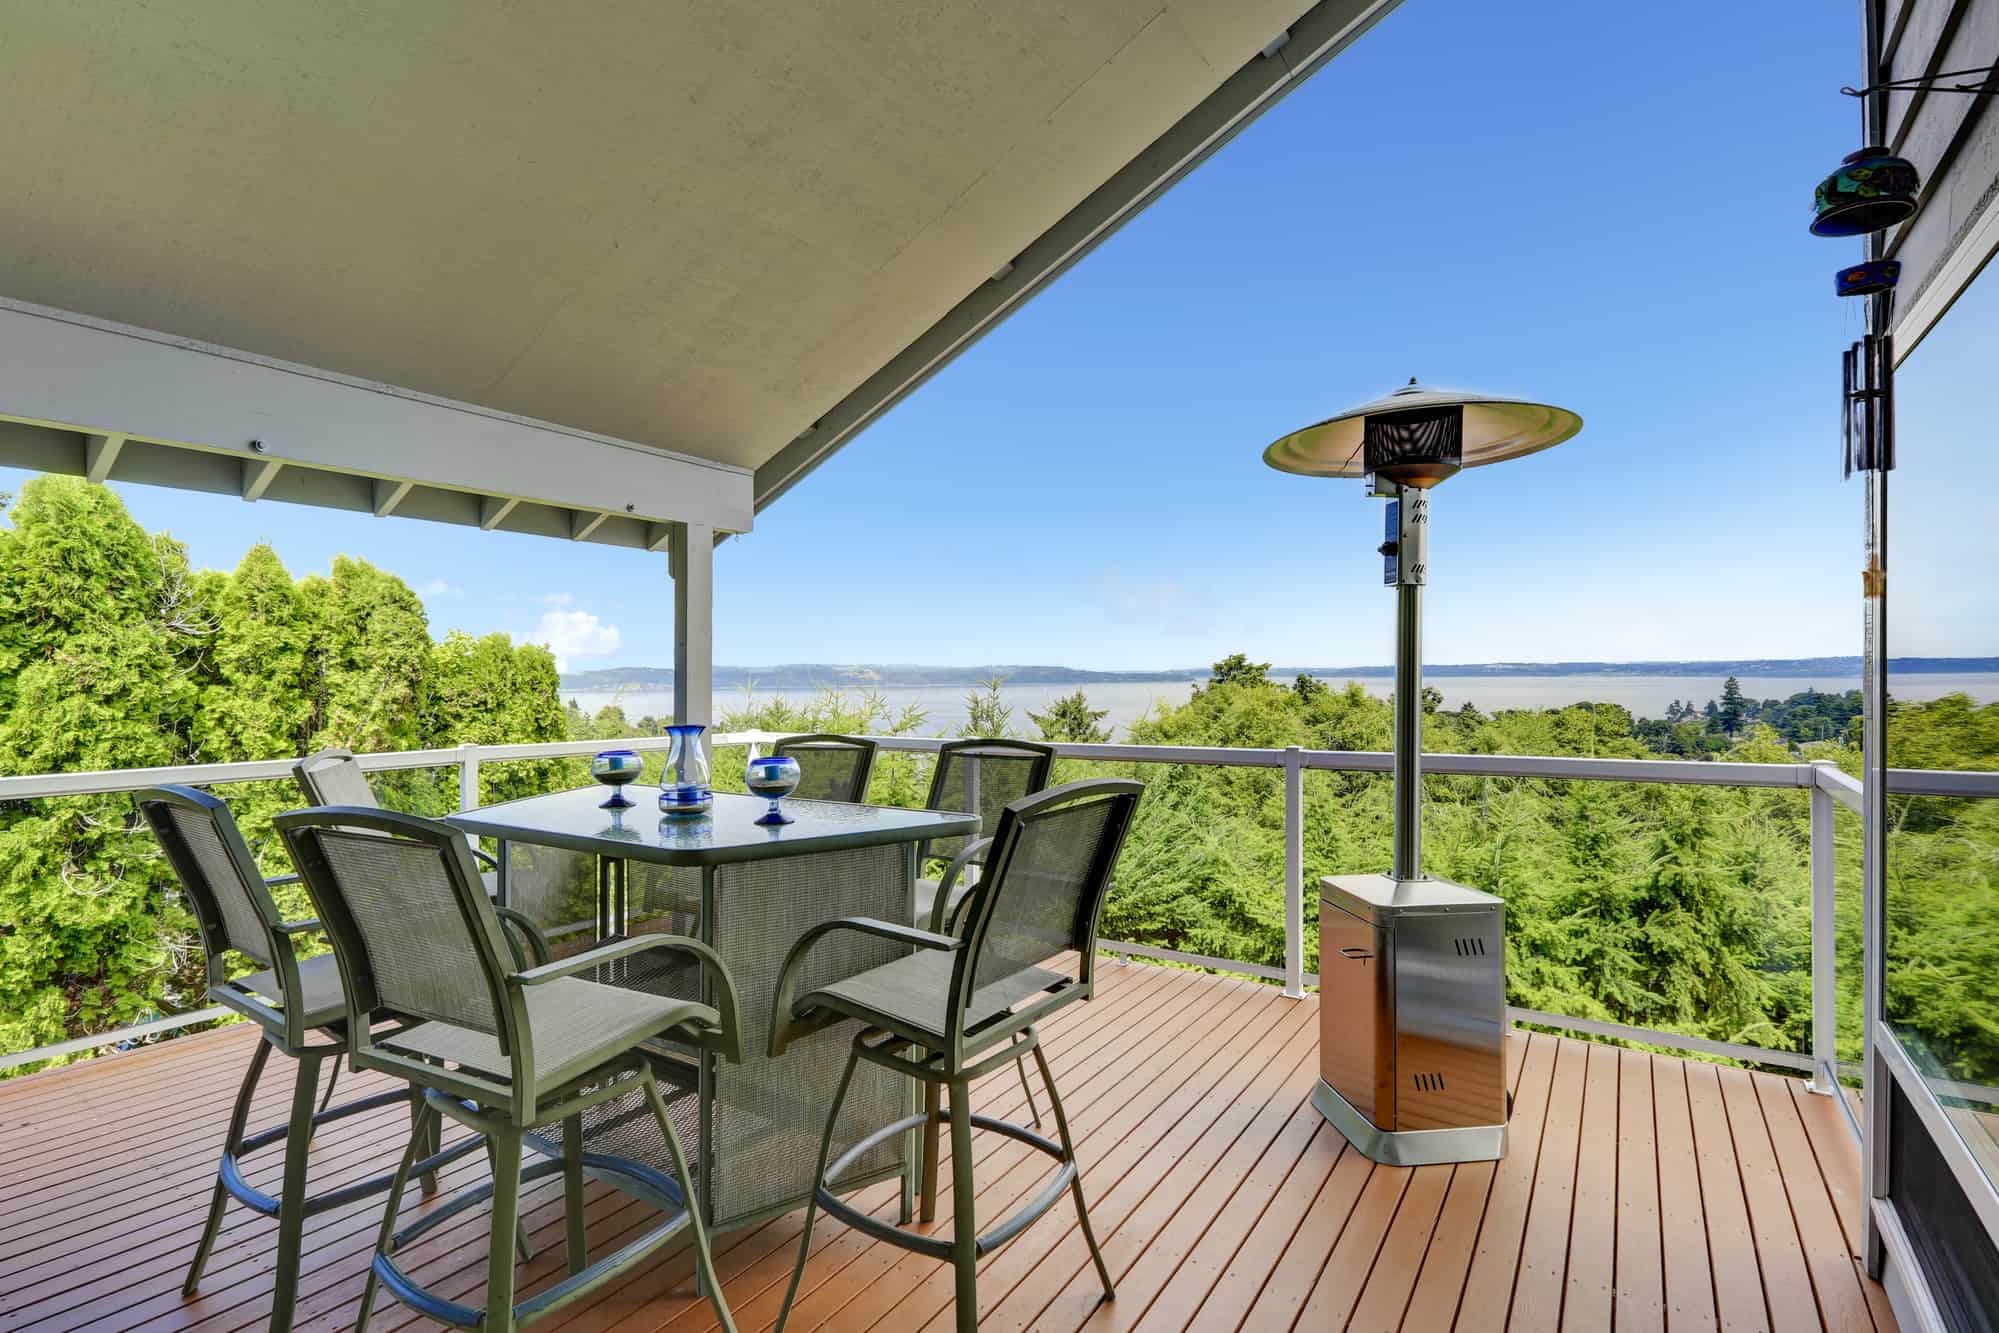 Can You Use a Patio Heater Under a Covered Patio? - Living the Outdoor Life